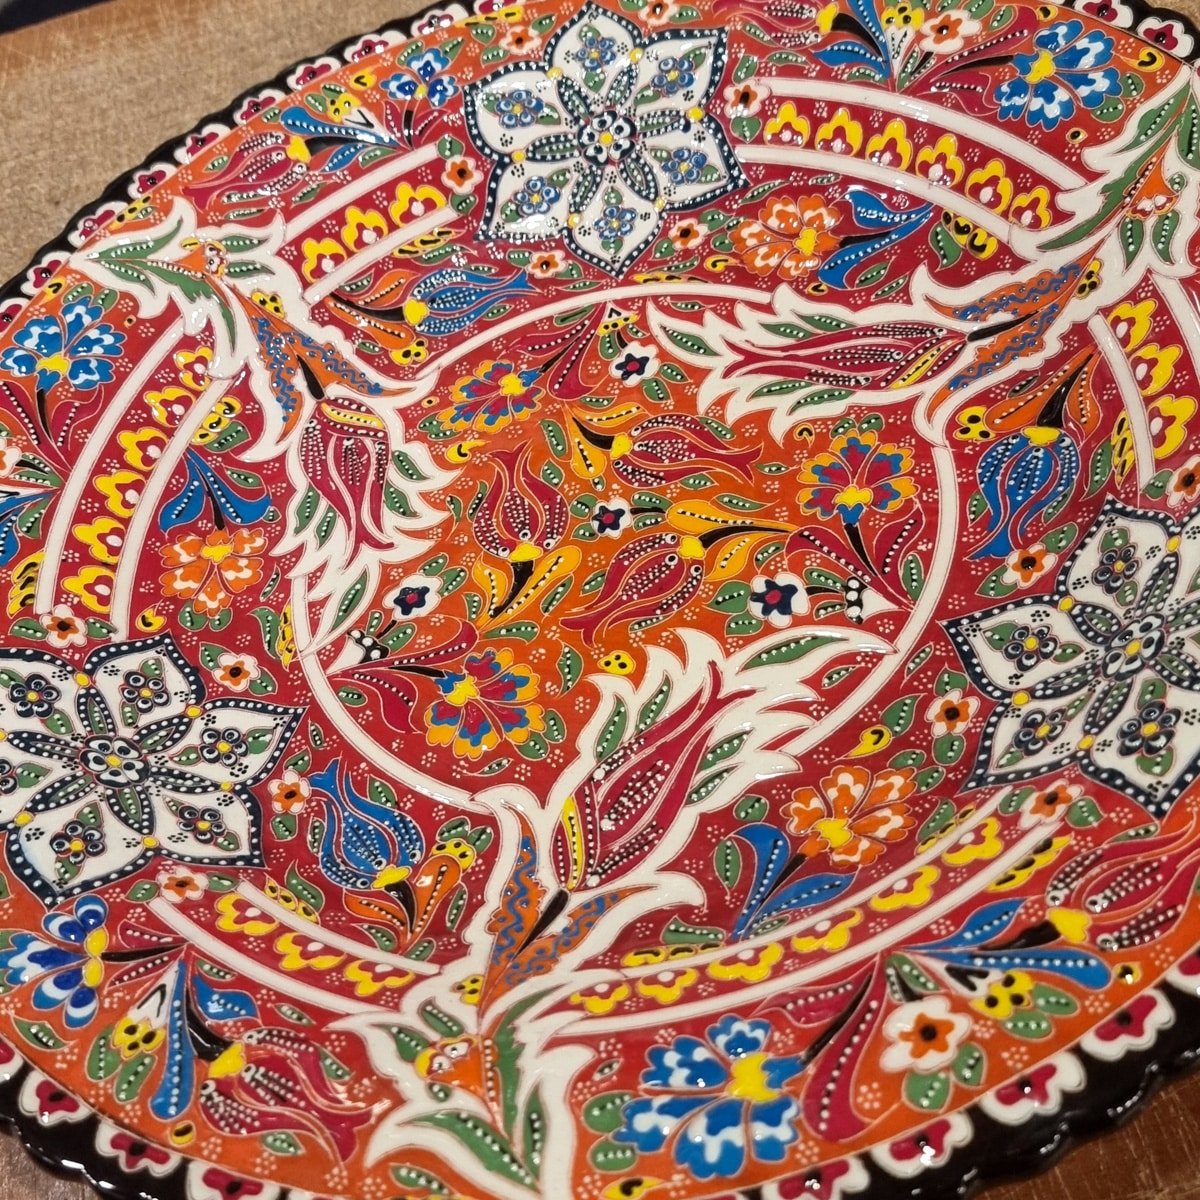 Close-up of a colorful, intricately designed ceramic plate from Avanos, Cappadocia, featuring vibrant floral and geometric patterns.